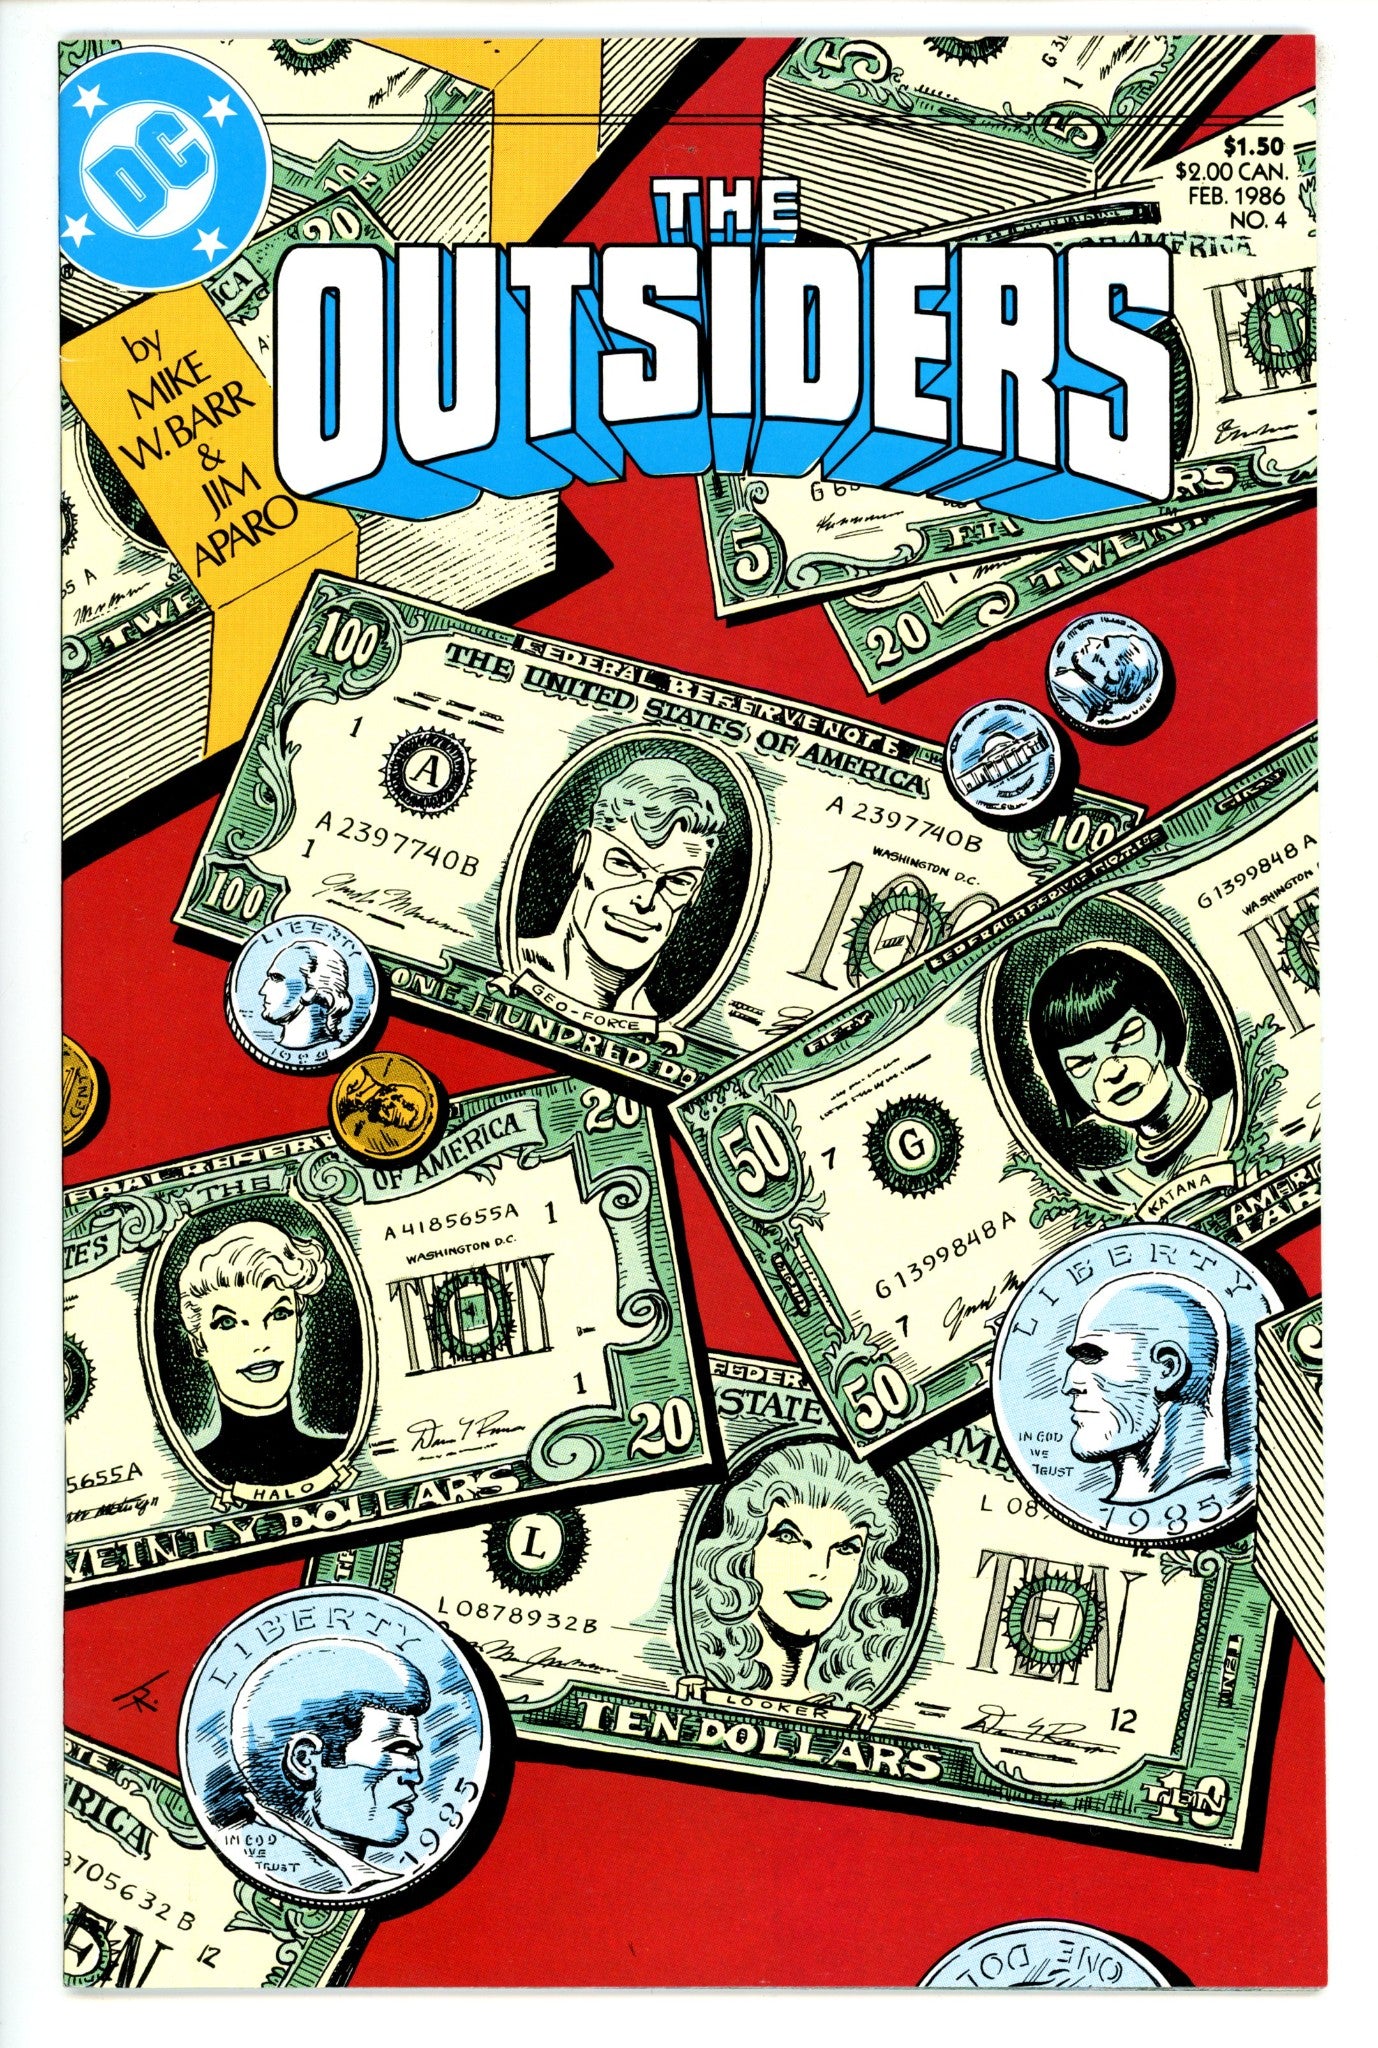 The Outsiders Vol 1 4